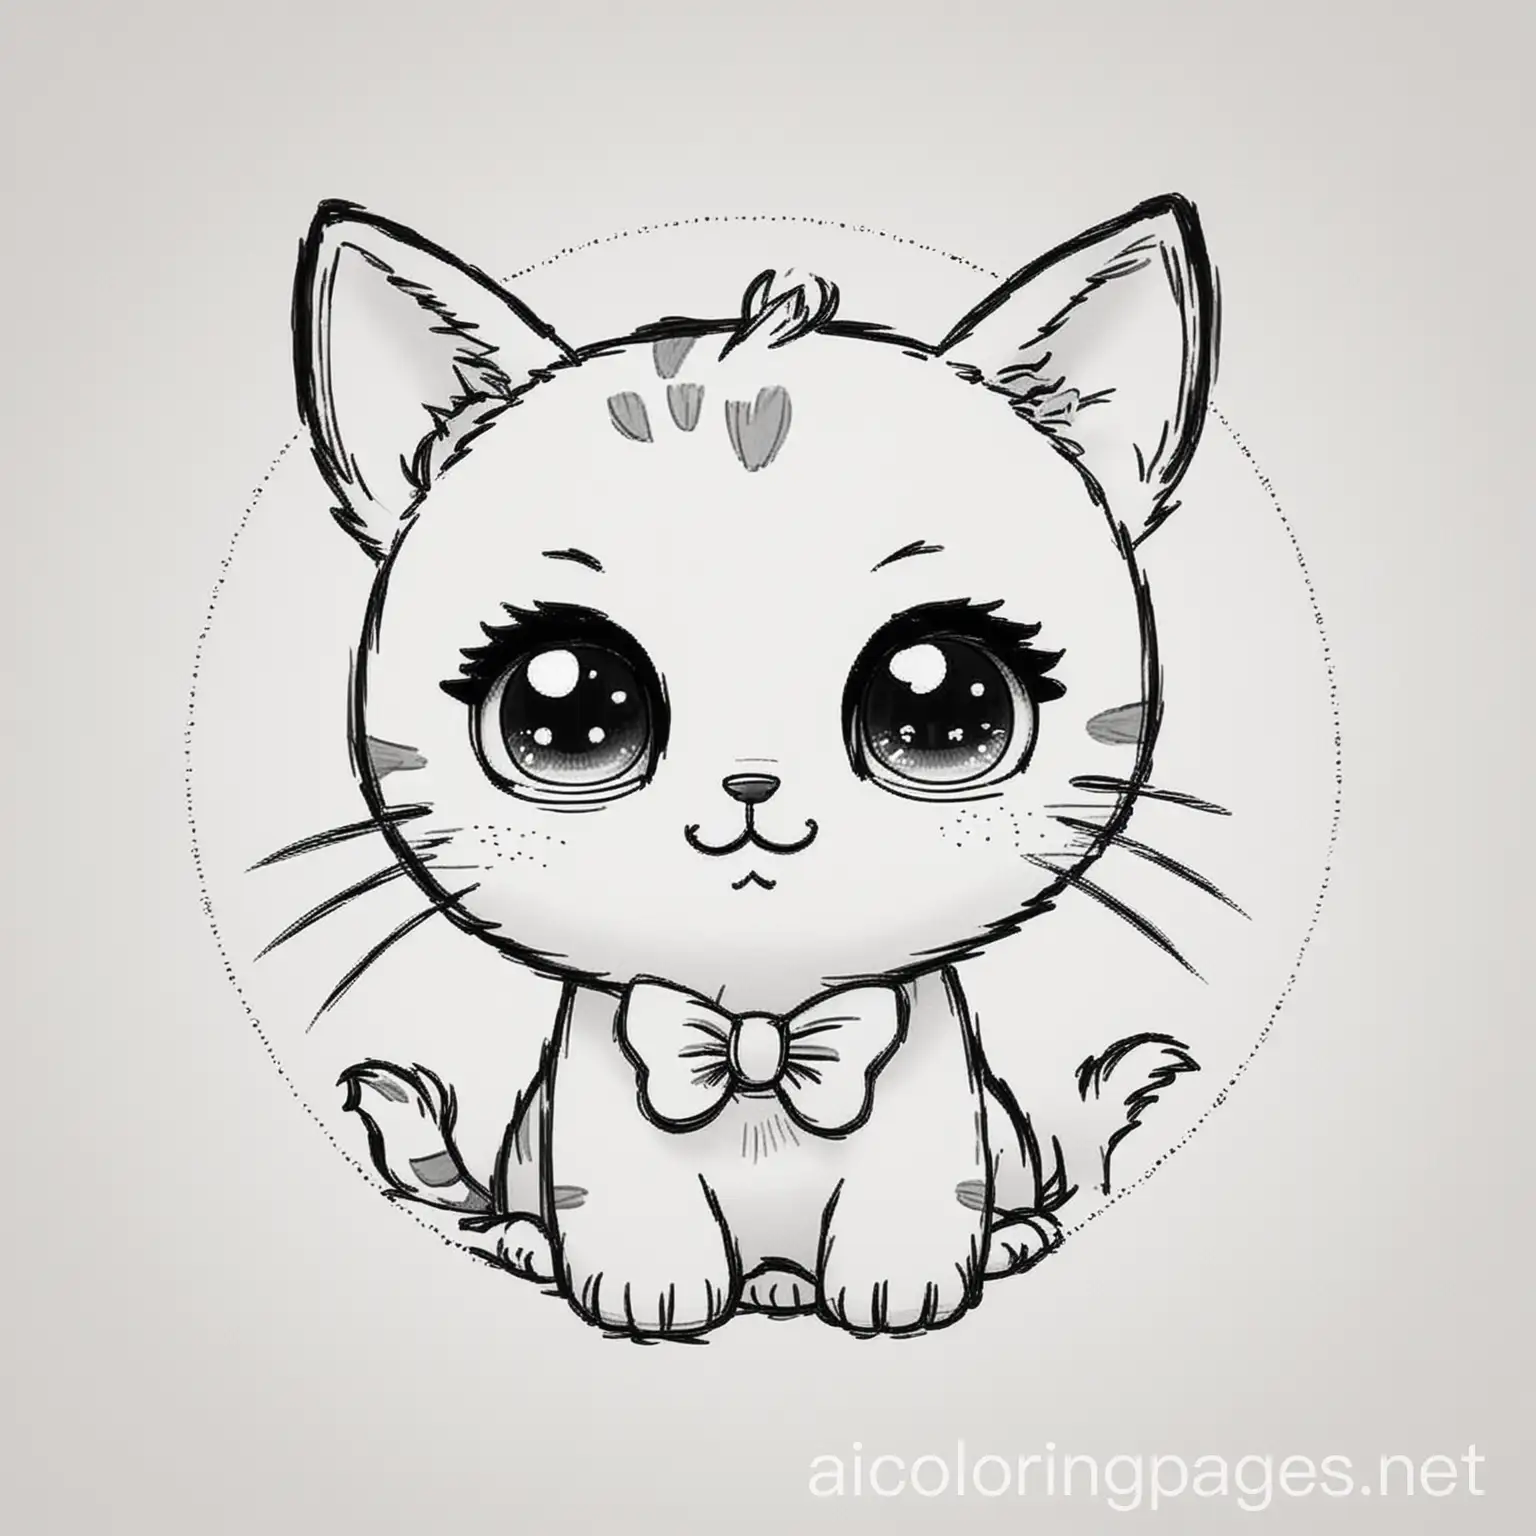 Kawaii Cat - Round face with big eyes, tiny whiskers, and a small bow on the ear, Coloring Page, black and white, line art, white background, Simplicity, Ample White Space. The background of the coloring page is plain white to make it easy for young children to color within the lines. The outlines of all the subjects are easy to distinguish, making it simple for kids to color without too much difficulty